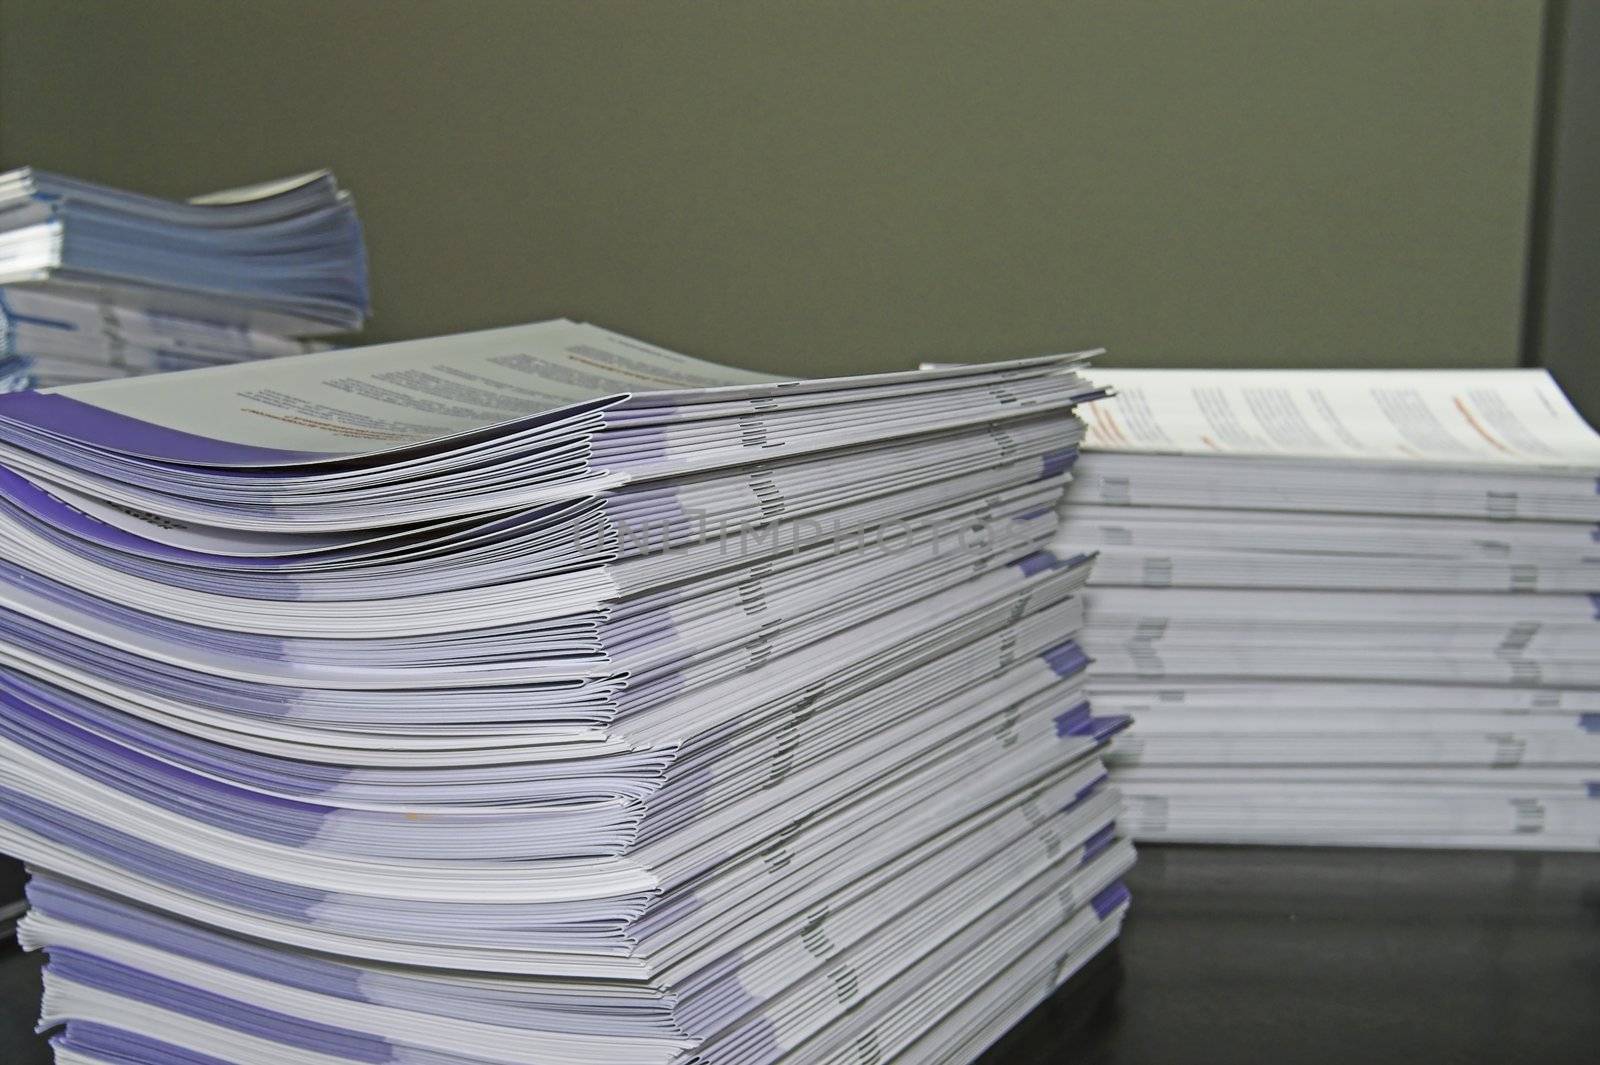 Piles of handout papers lying on a table.